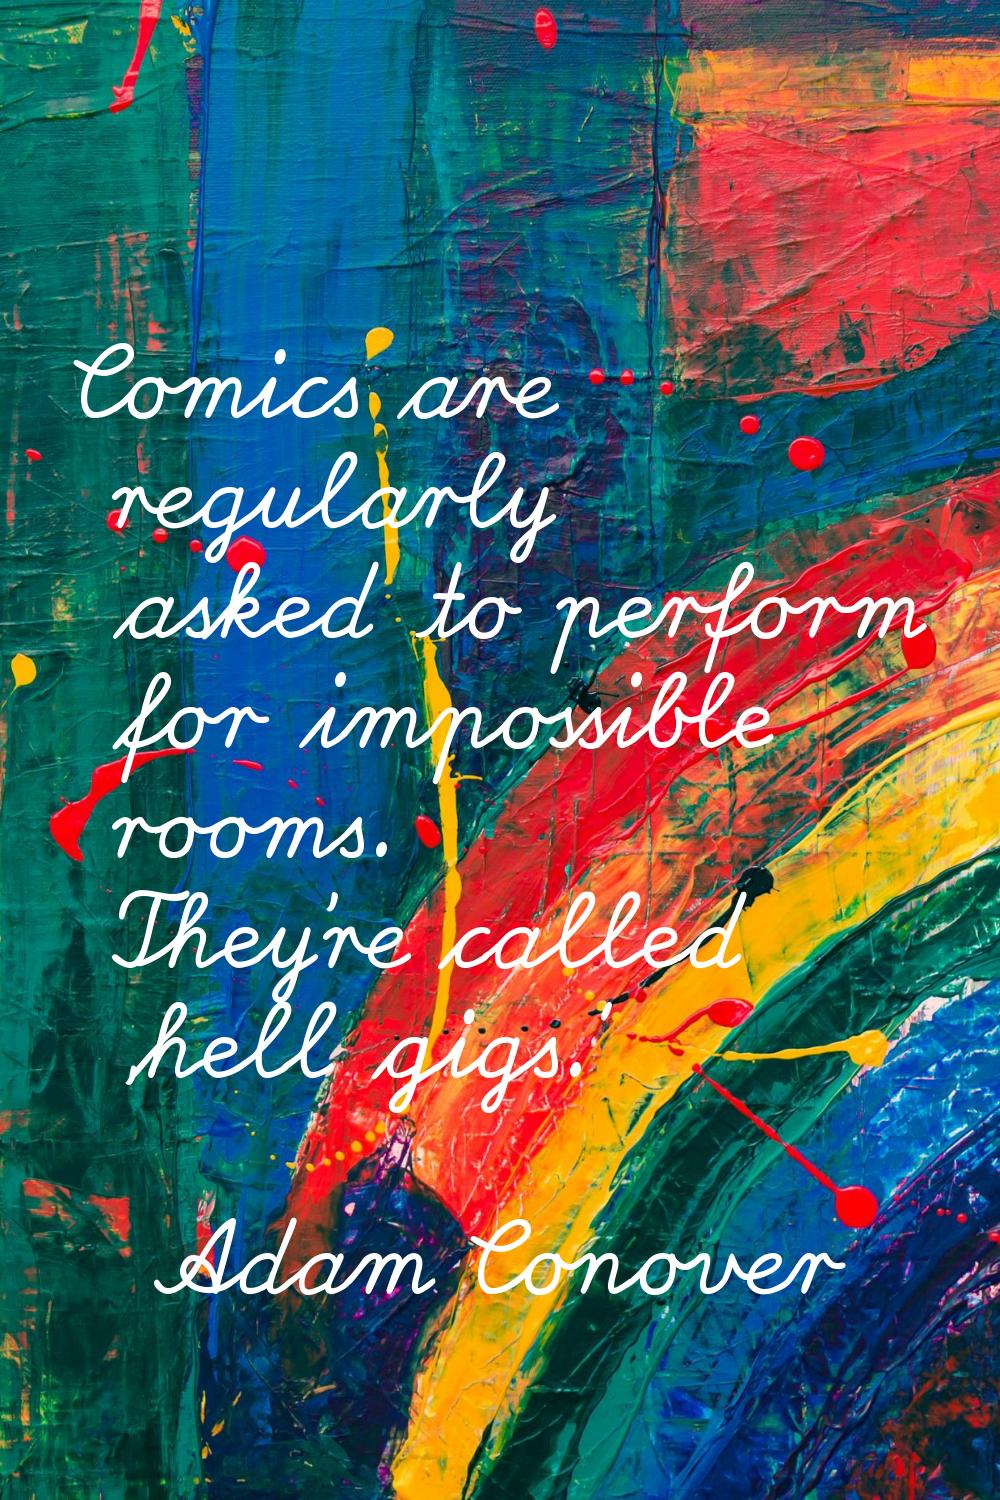 Comics are regularly asked to perform for impossible rooms. They're called 'hell gigs.'